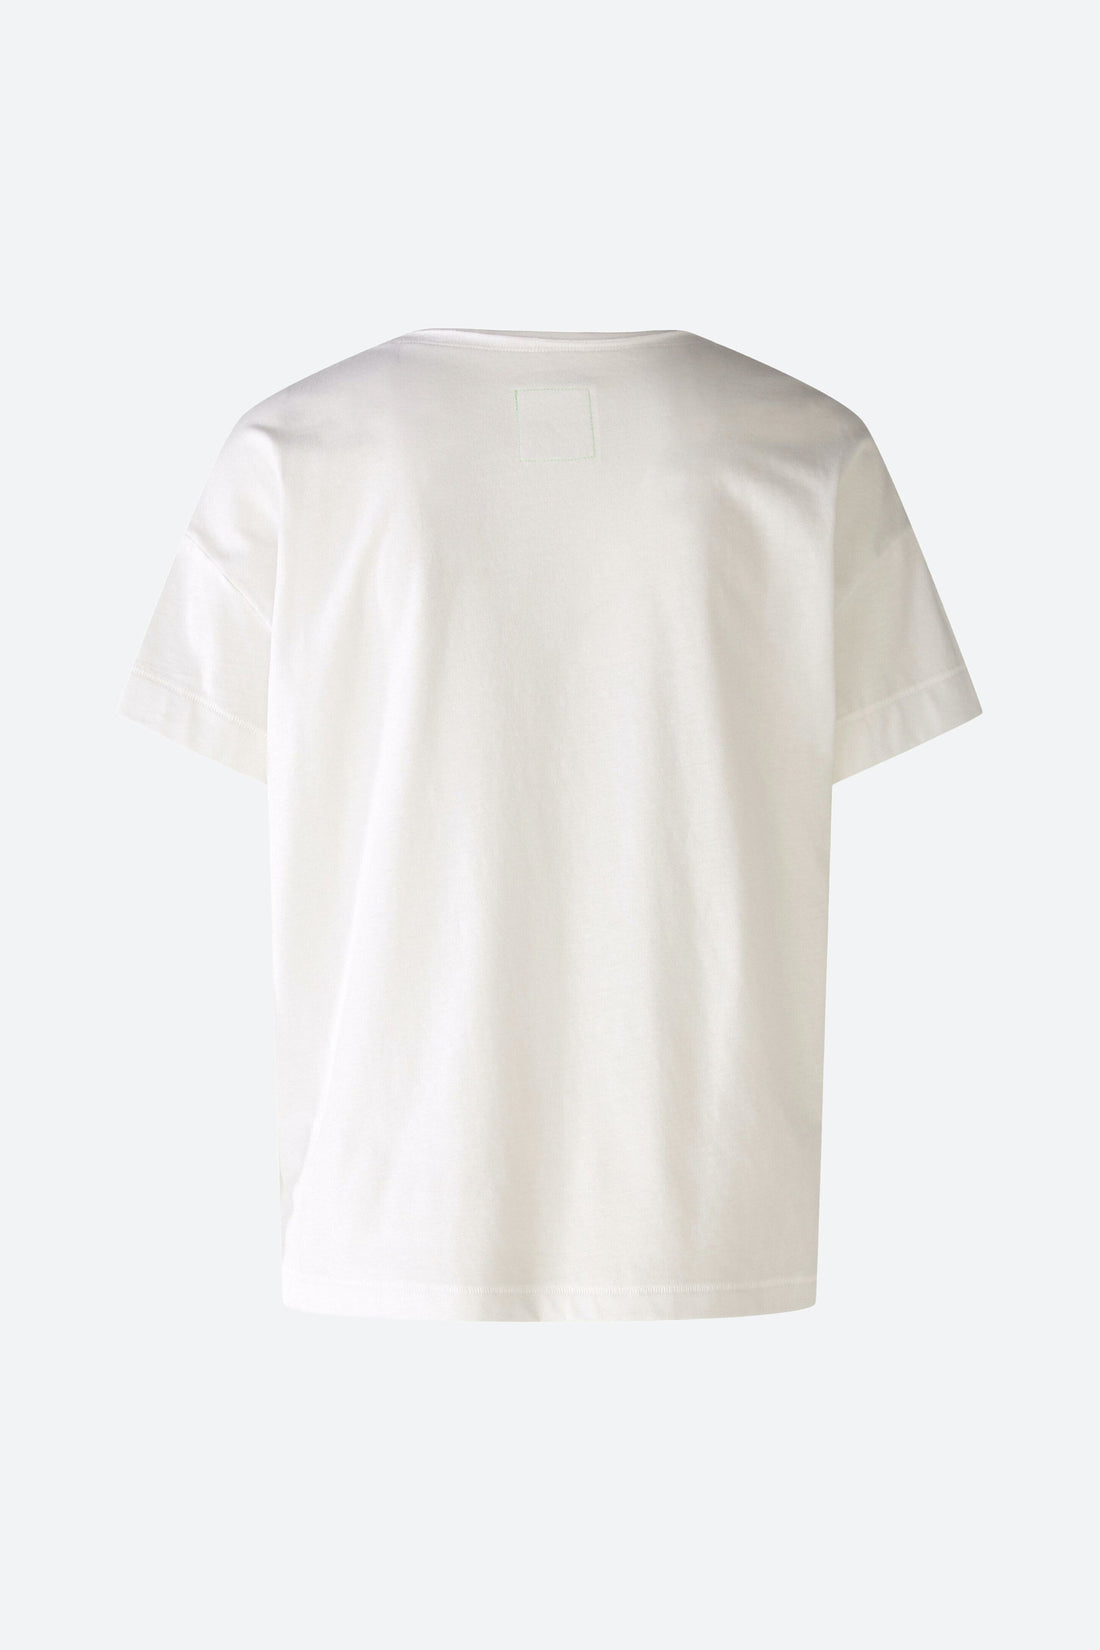 T-Shirt Oversized Made From 100% Organic Cotton_79355_1006_02